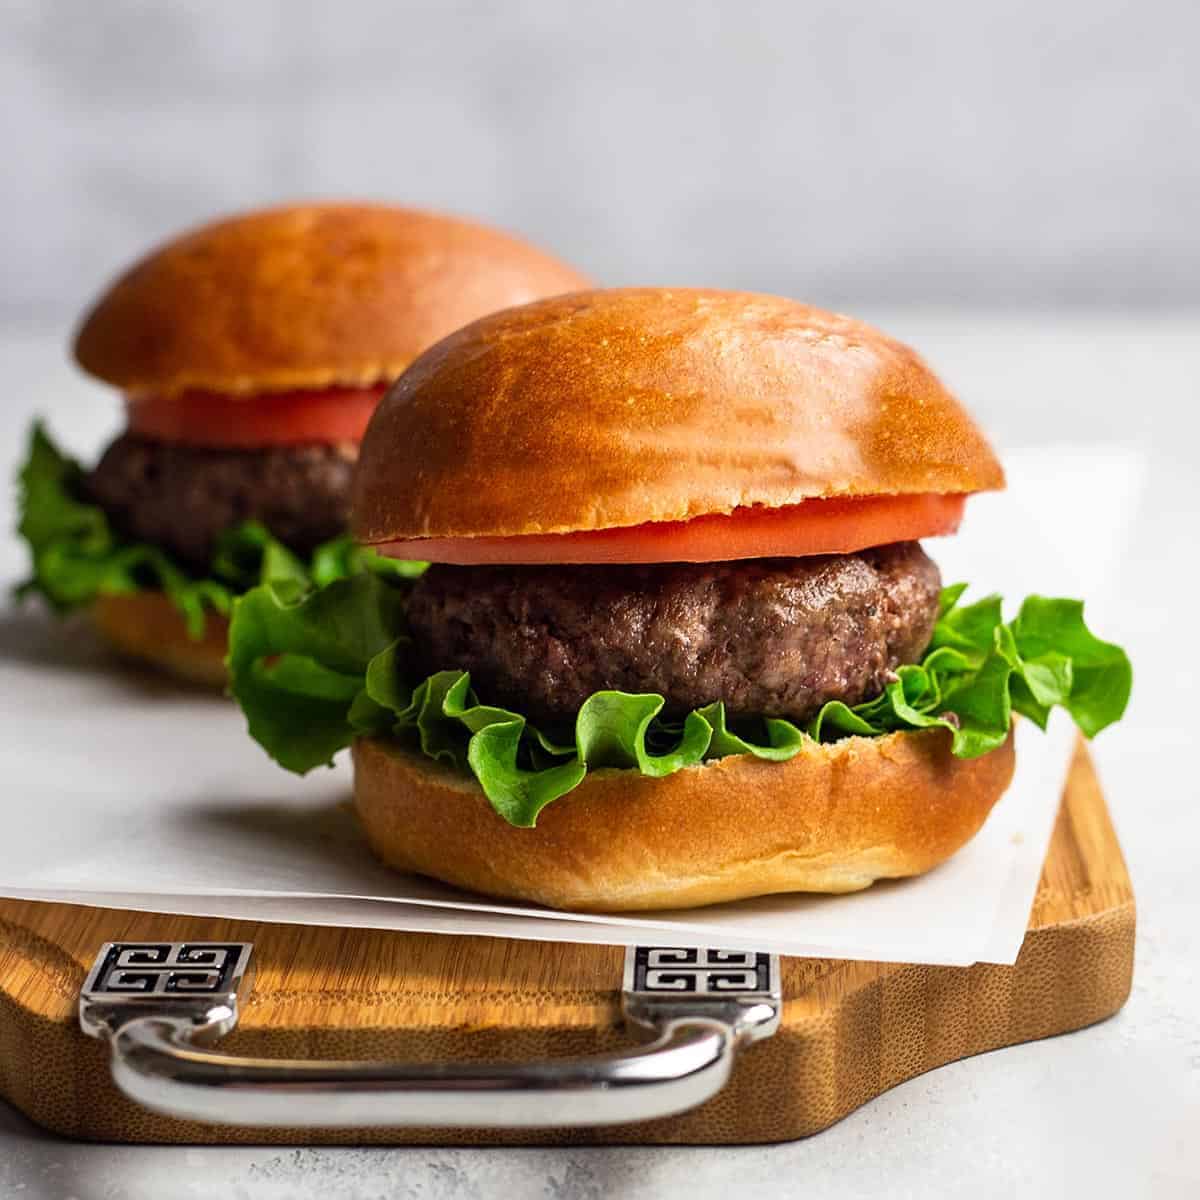 Air fryer burgers with garlic butter spread